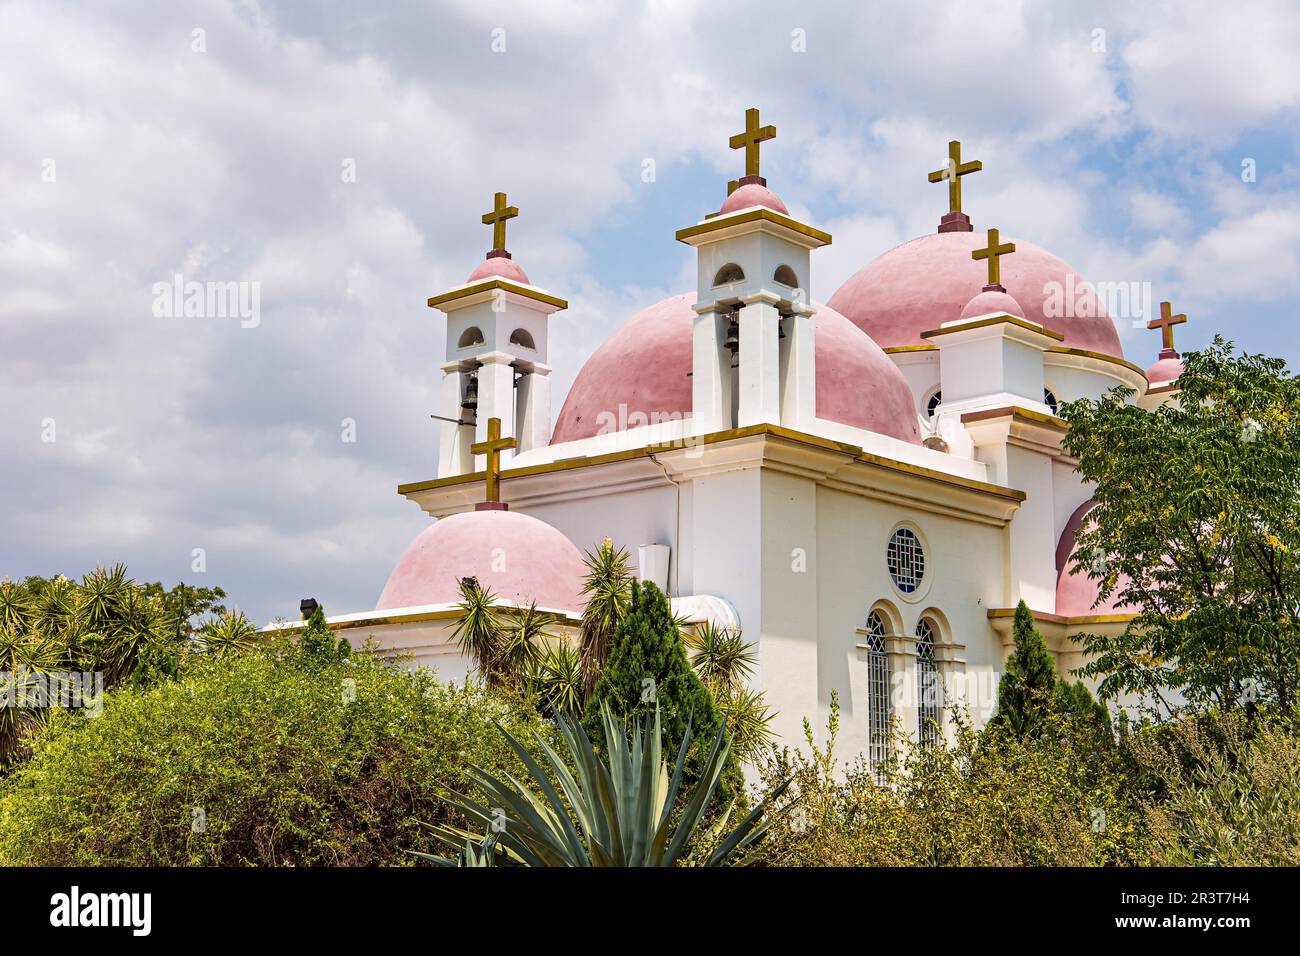 Greek Orthodox monastery of the Twelve Apostles. Capernaum. Israel. Tropical park around the Church. Pink domes with golden crosses of the monastery o Stock Photo